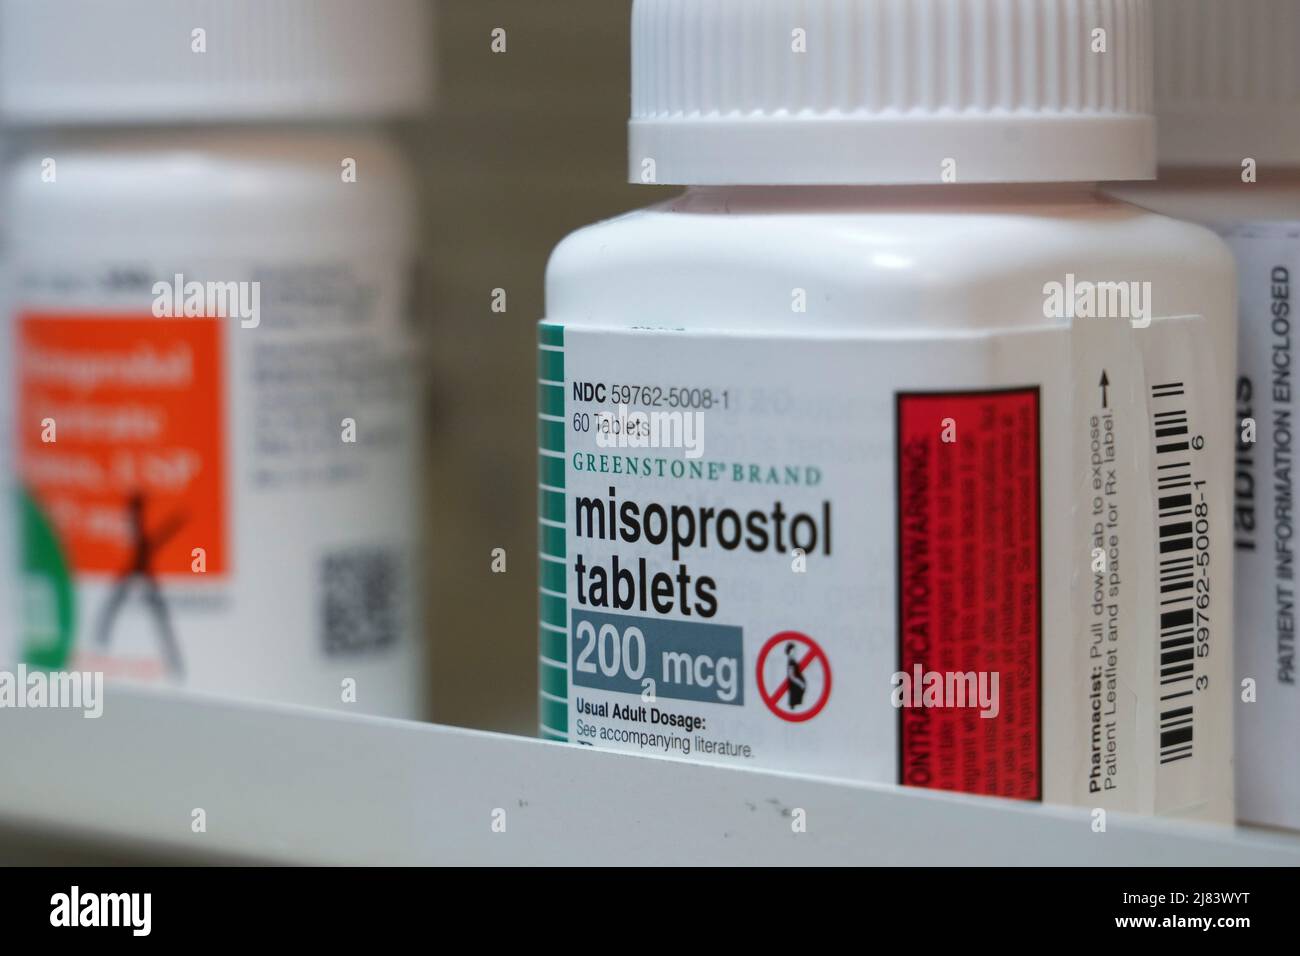 Bottles of Misoprostol, used to terminate early pregnancies, are displayed in a pharmacy in Provo, Utah, U.S. May 12, 2022. REUTERS/George Frey Stock Photo